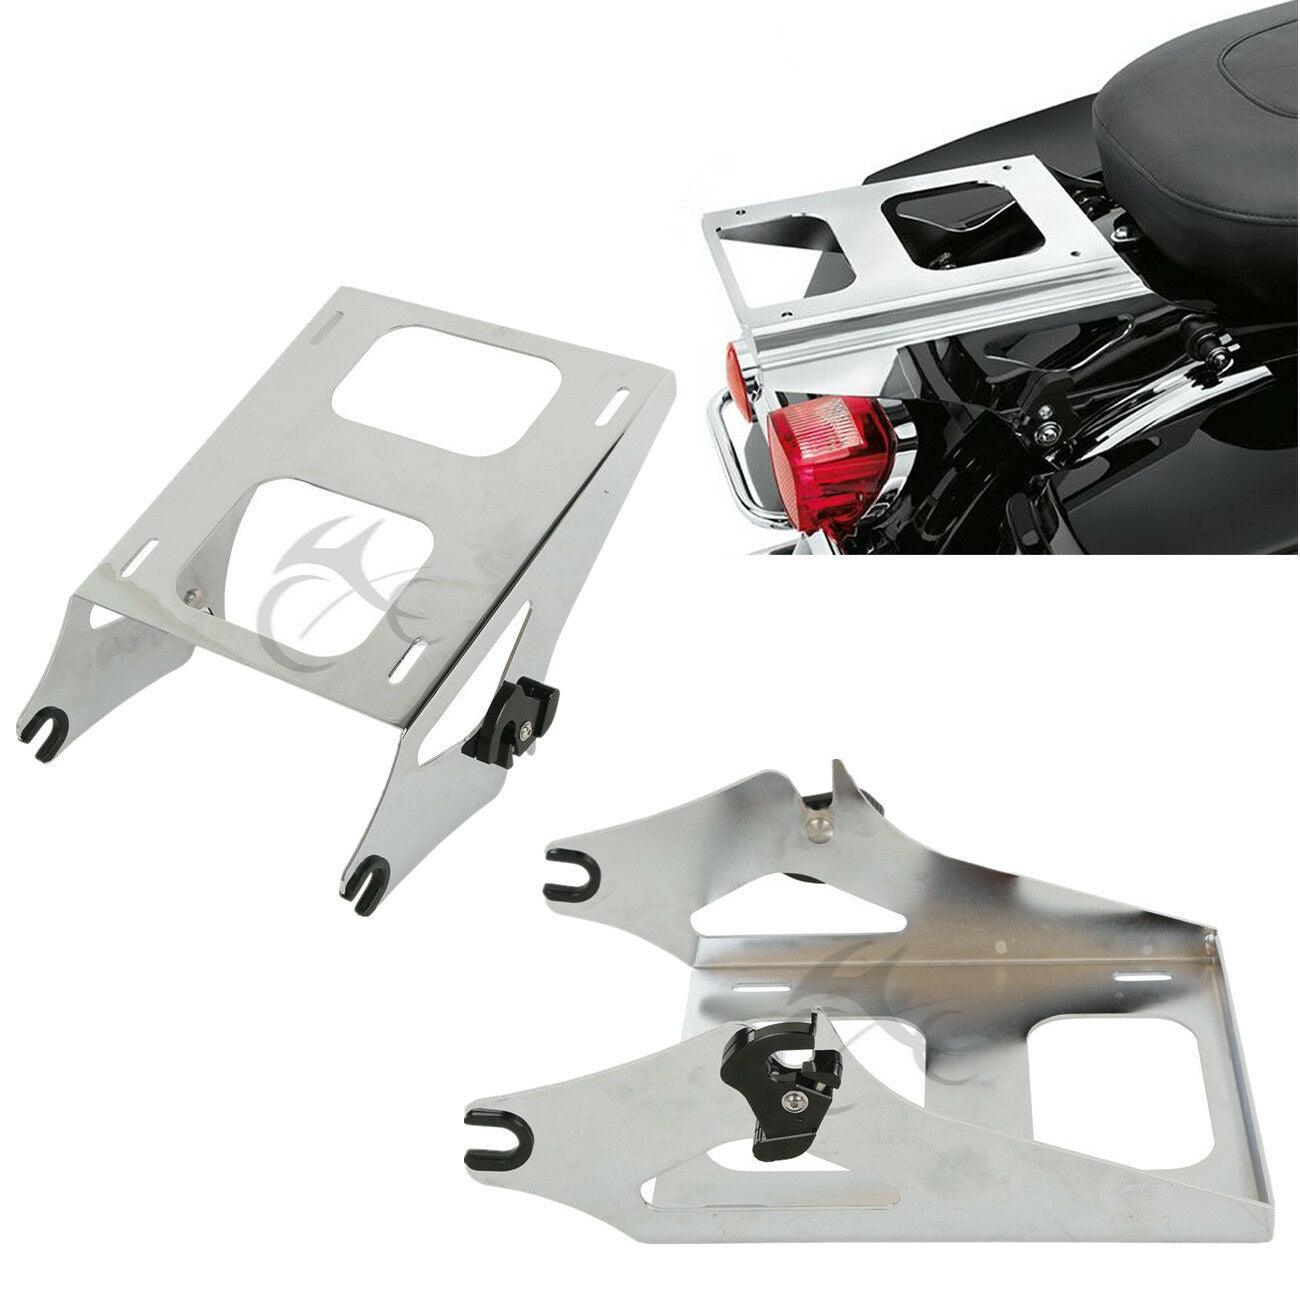 Detachable Two Up Pack Mount Luggage Rack Fit For Harley Tour Pak Touring 14-21 - Moto Life Products